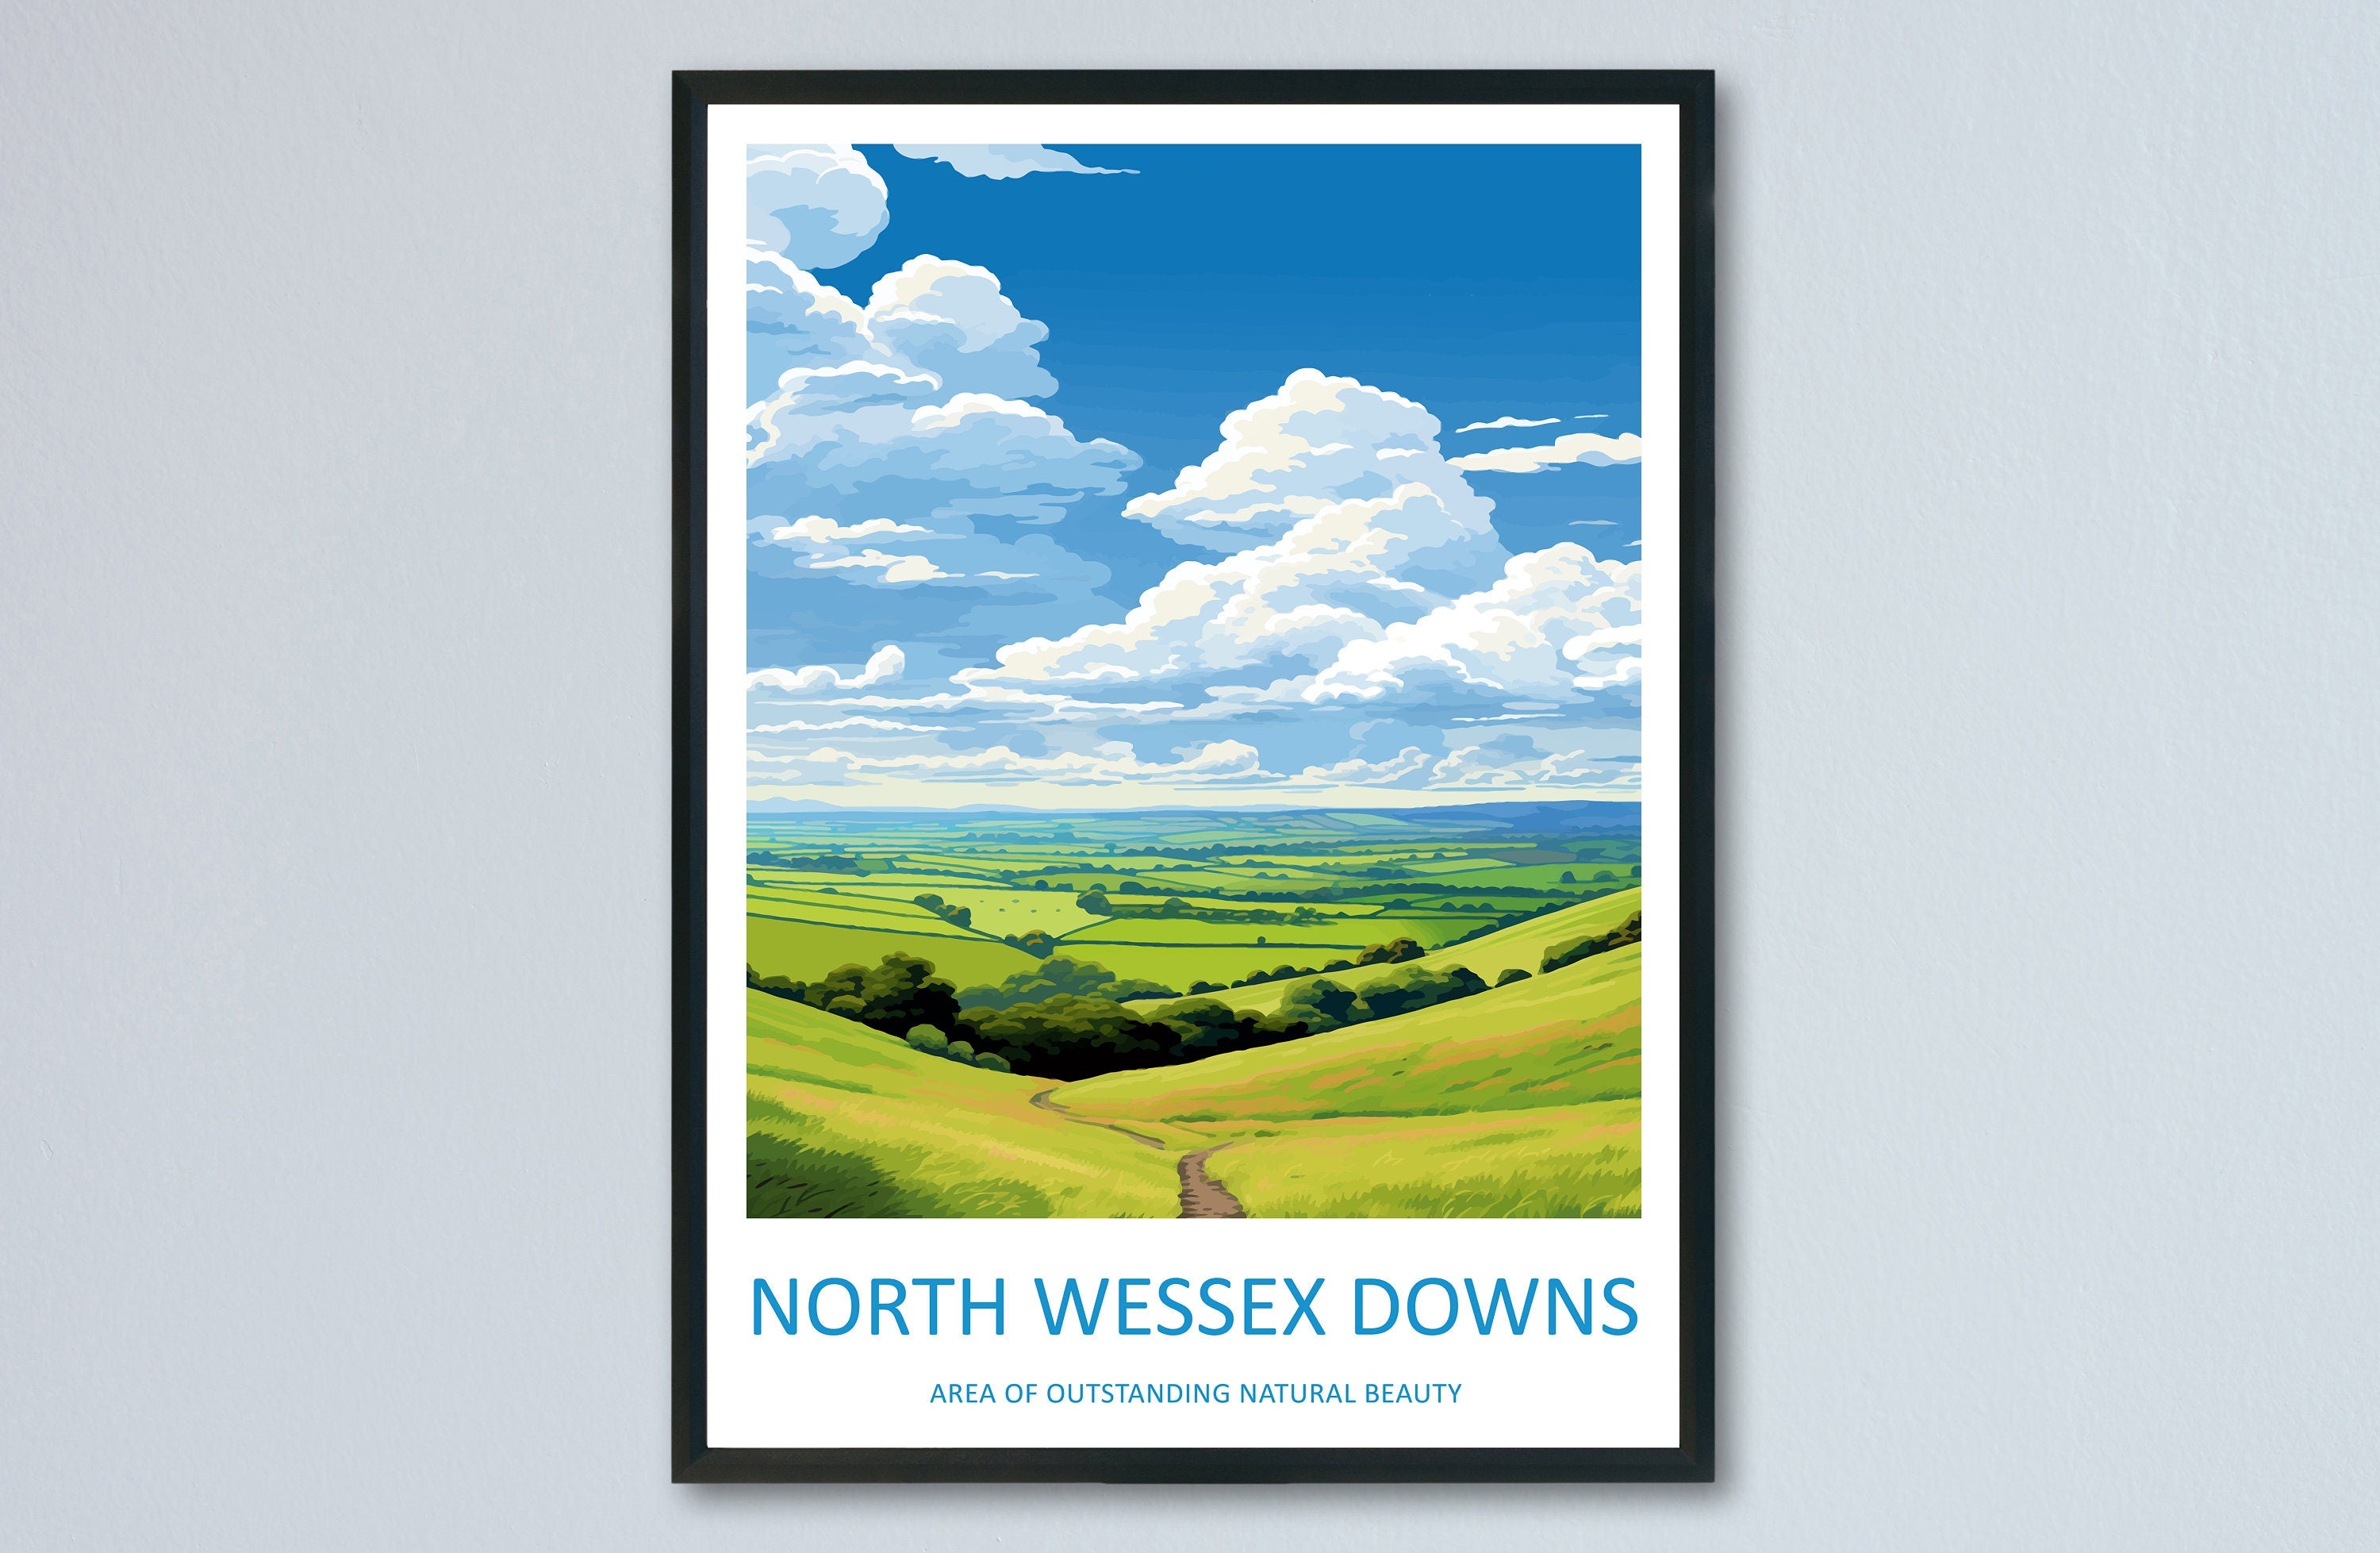 North Wessex Downs Travel Print Wall Art North Wessex Downs Wall Hanging Home Decor North Wessex Downs Gift Art Lovers Wall Art AONB Print